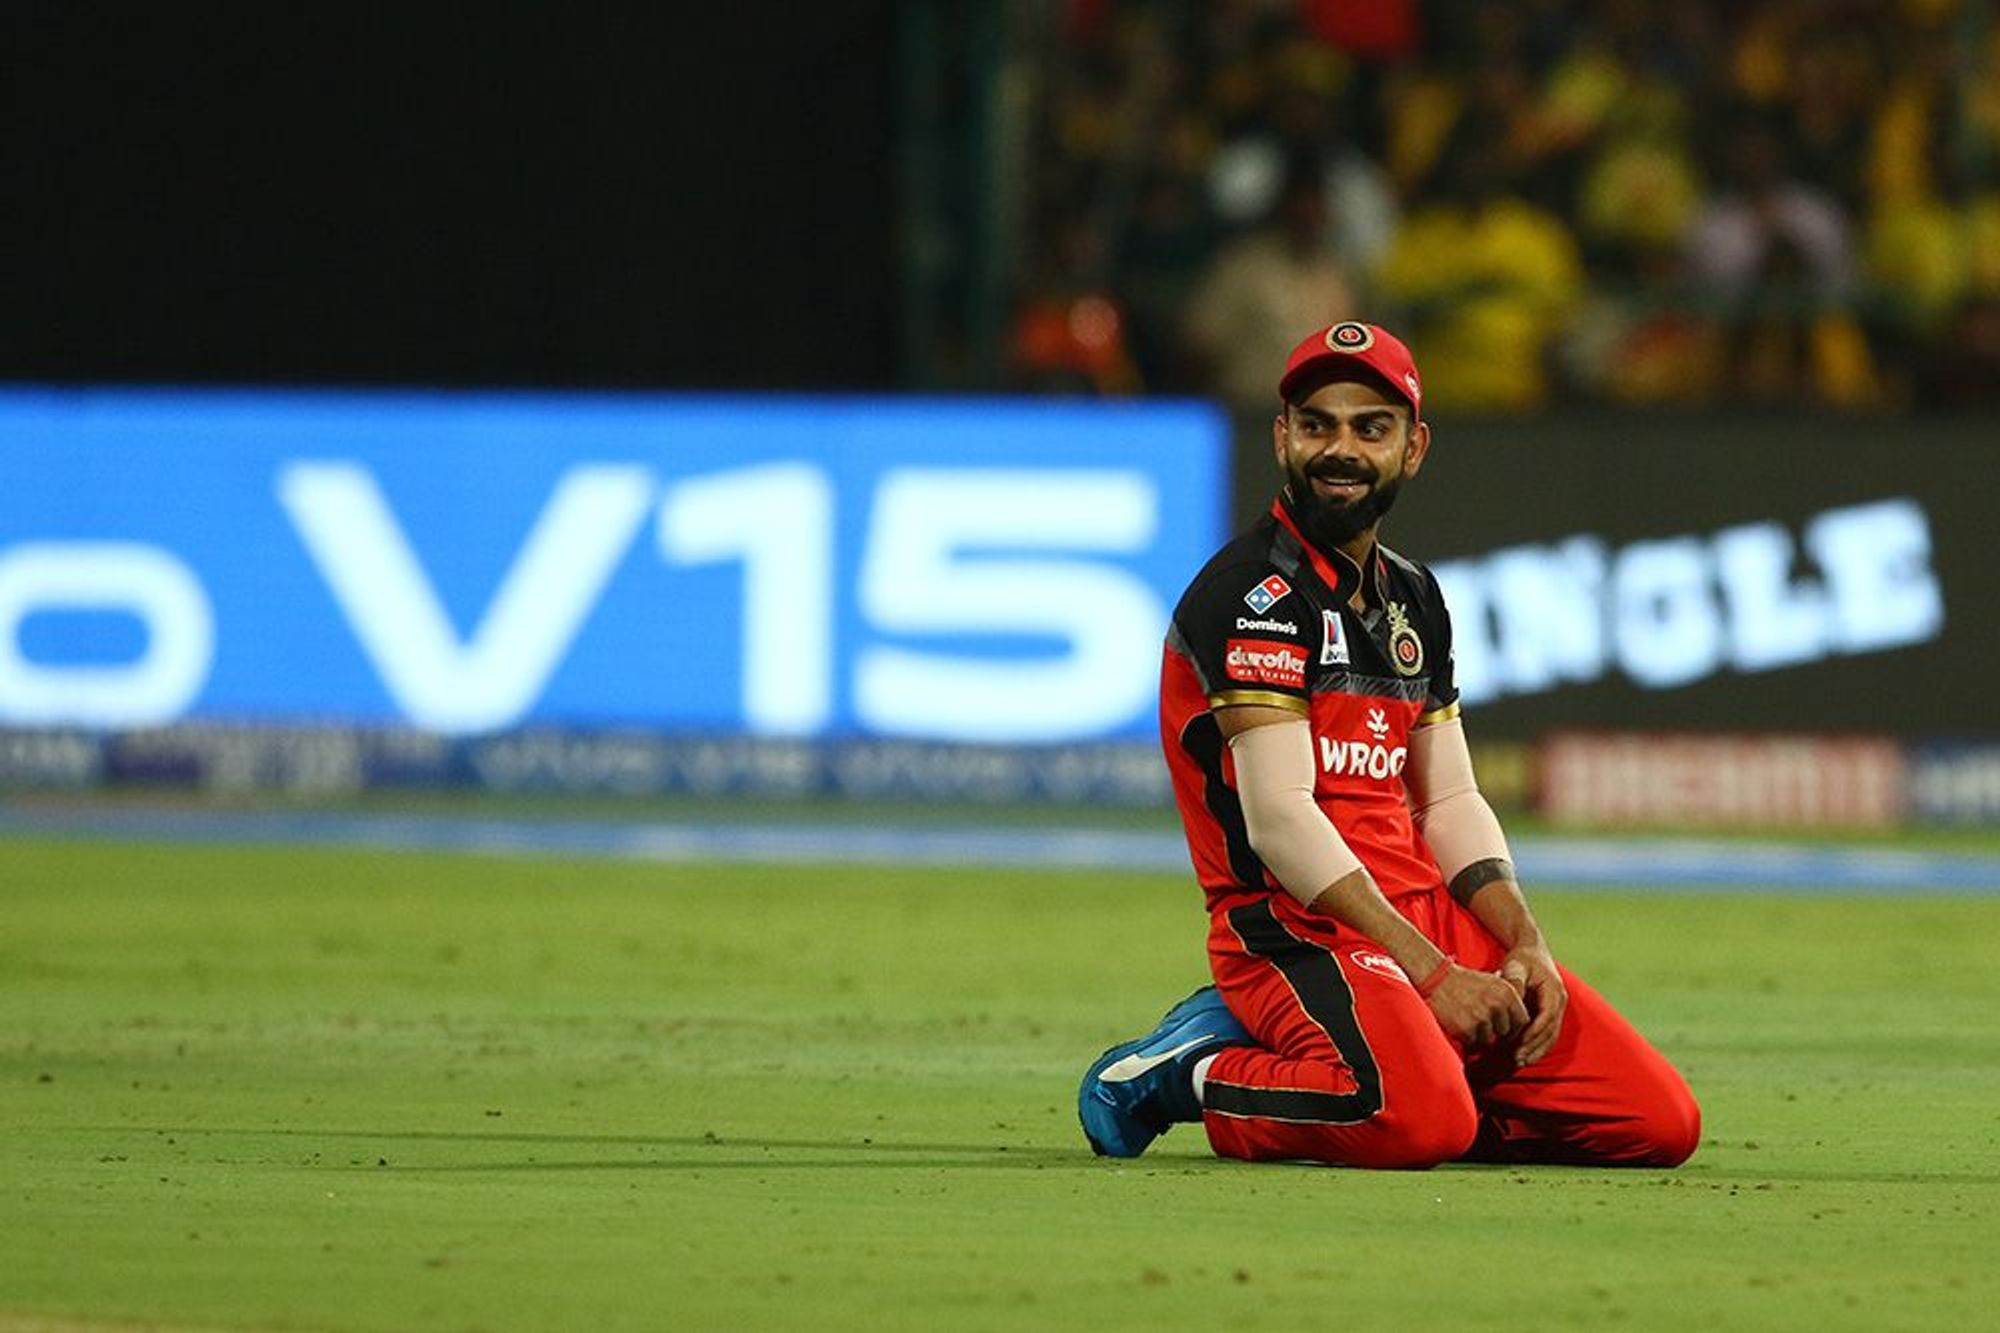 Not sure if Virat Kohli would be able to score runs properly without spectators, feels Paddy Upton